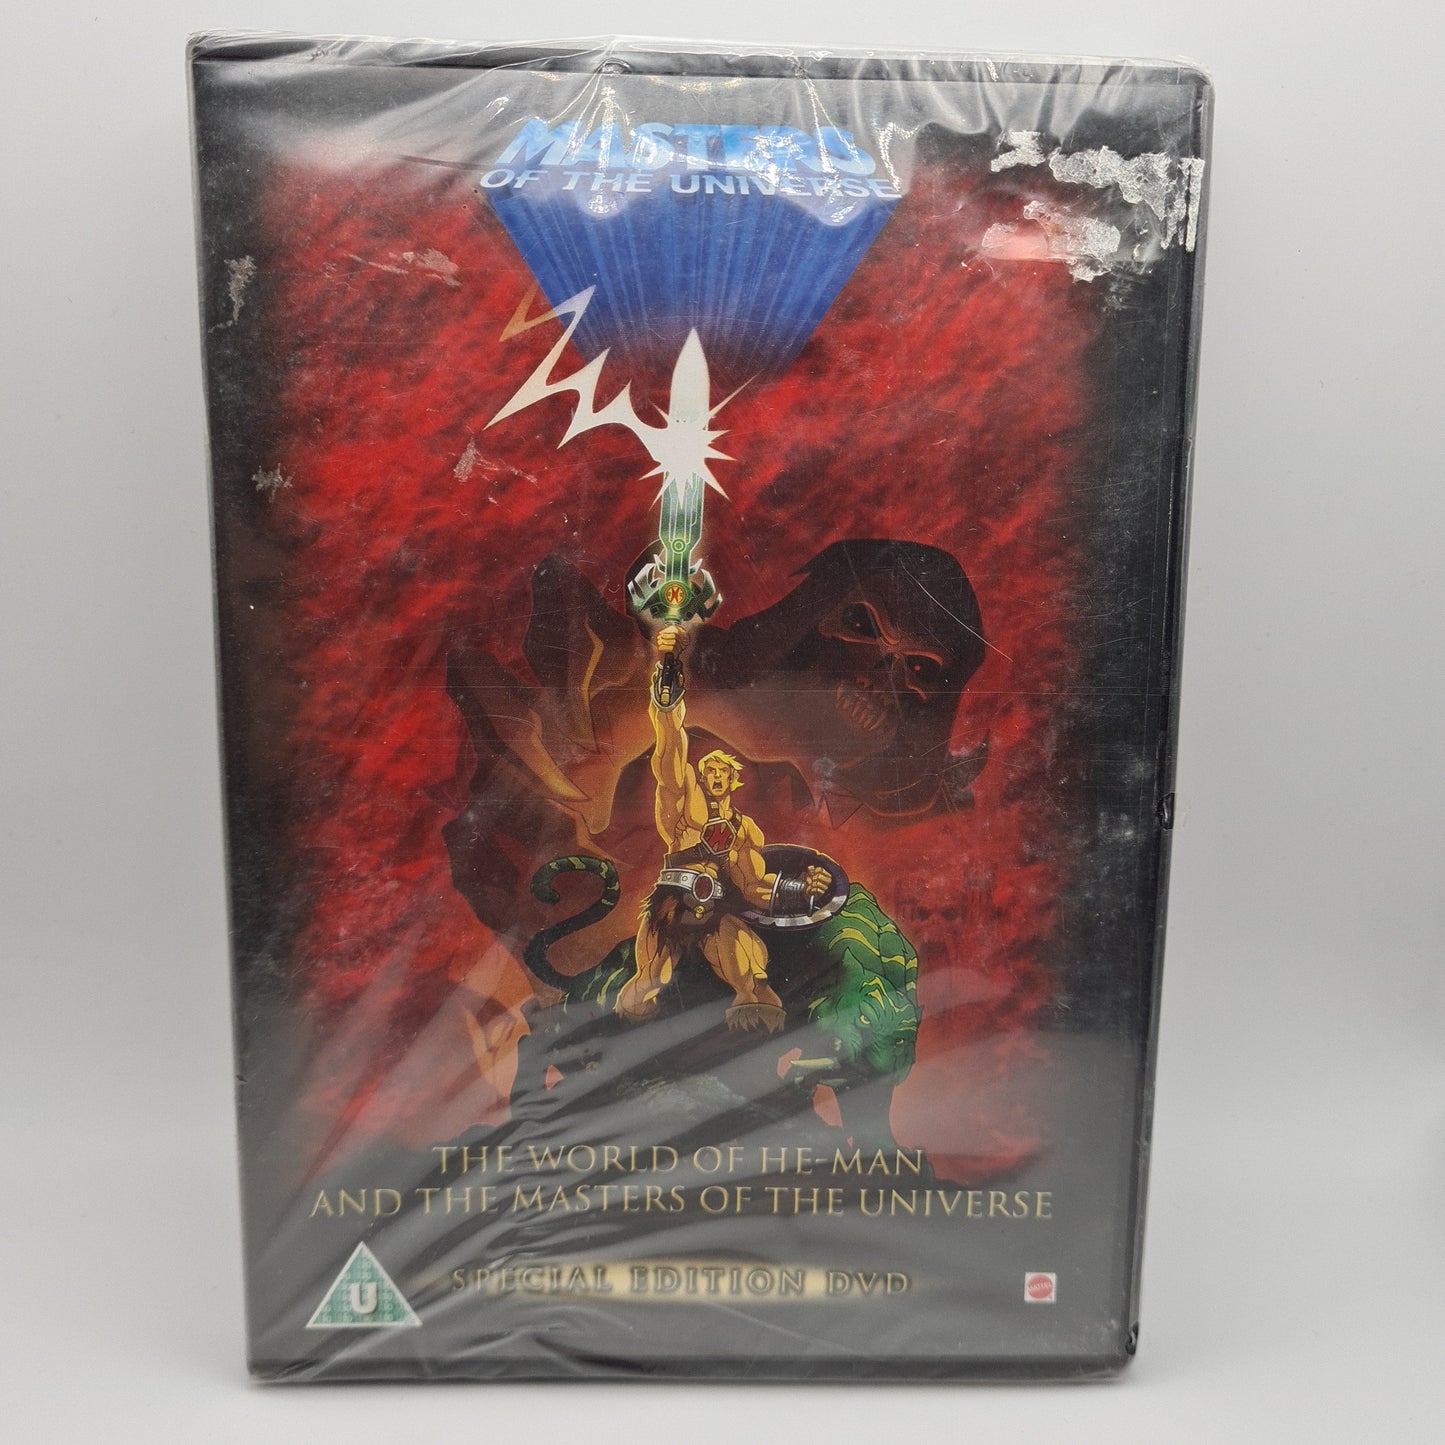 Masters of the Universe DVD 99p